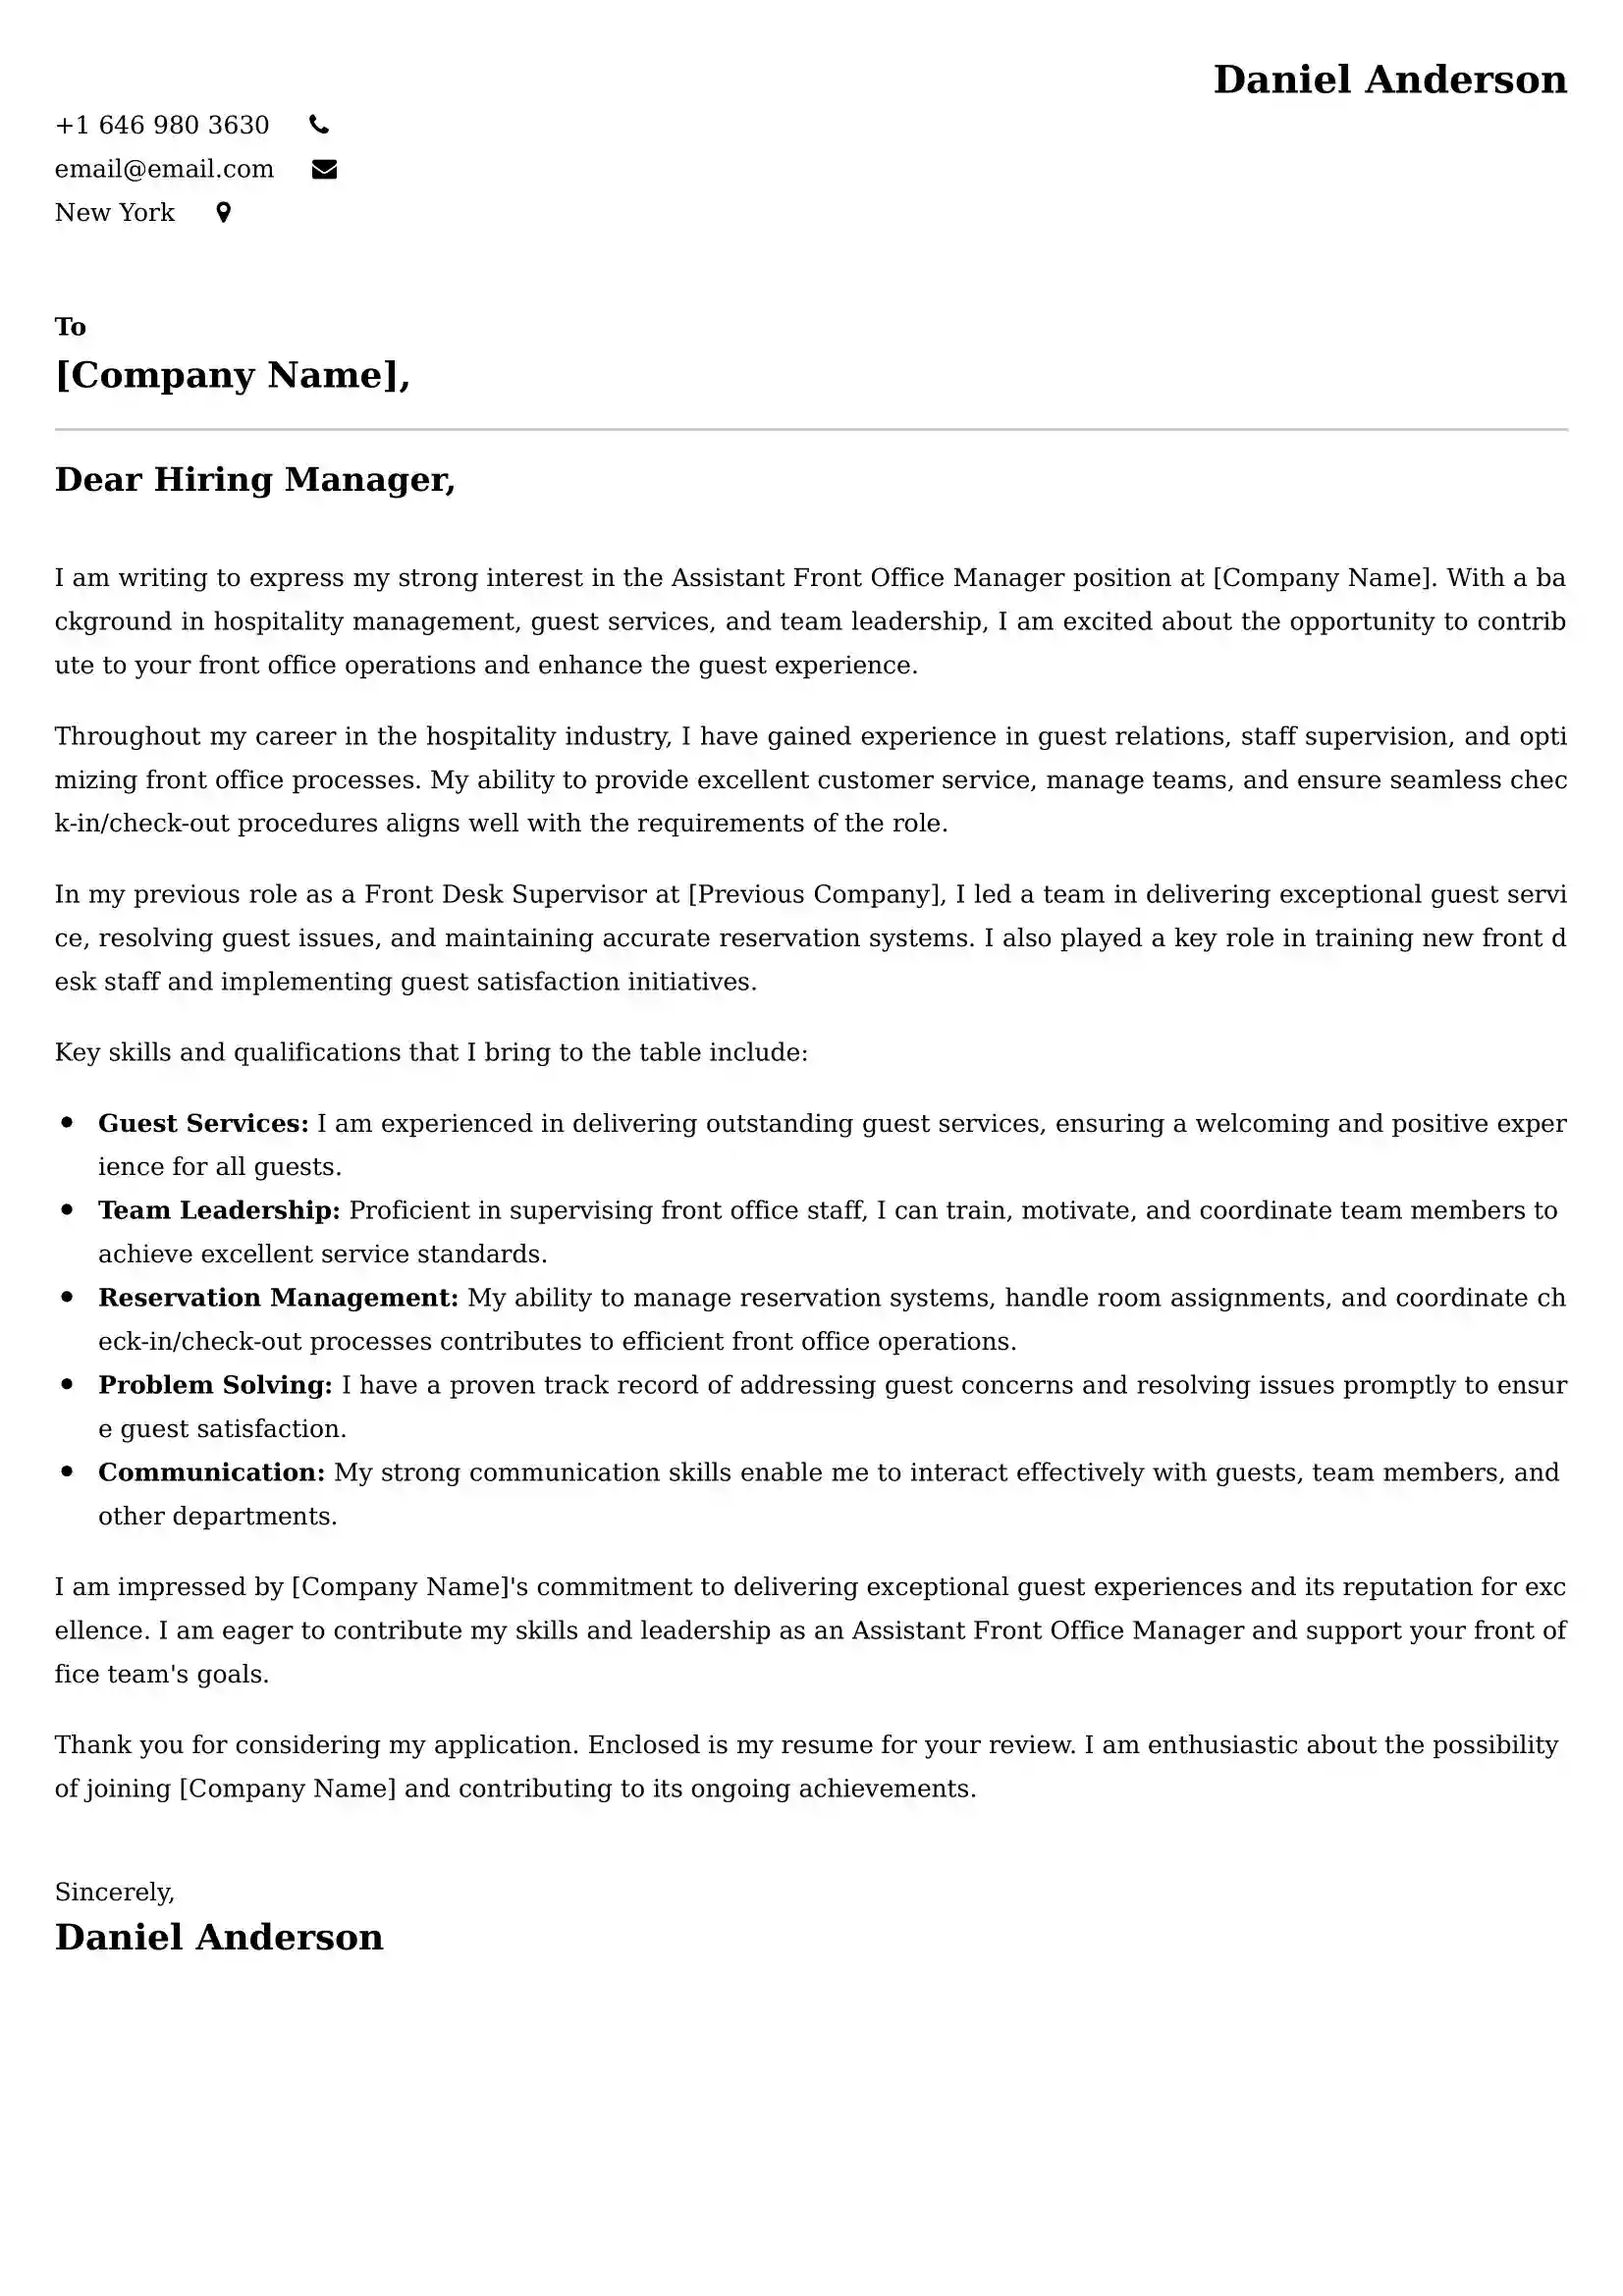 Assistant Front Office Manager Cover Letter Examples -Latest Brazilian Templates